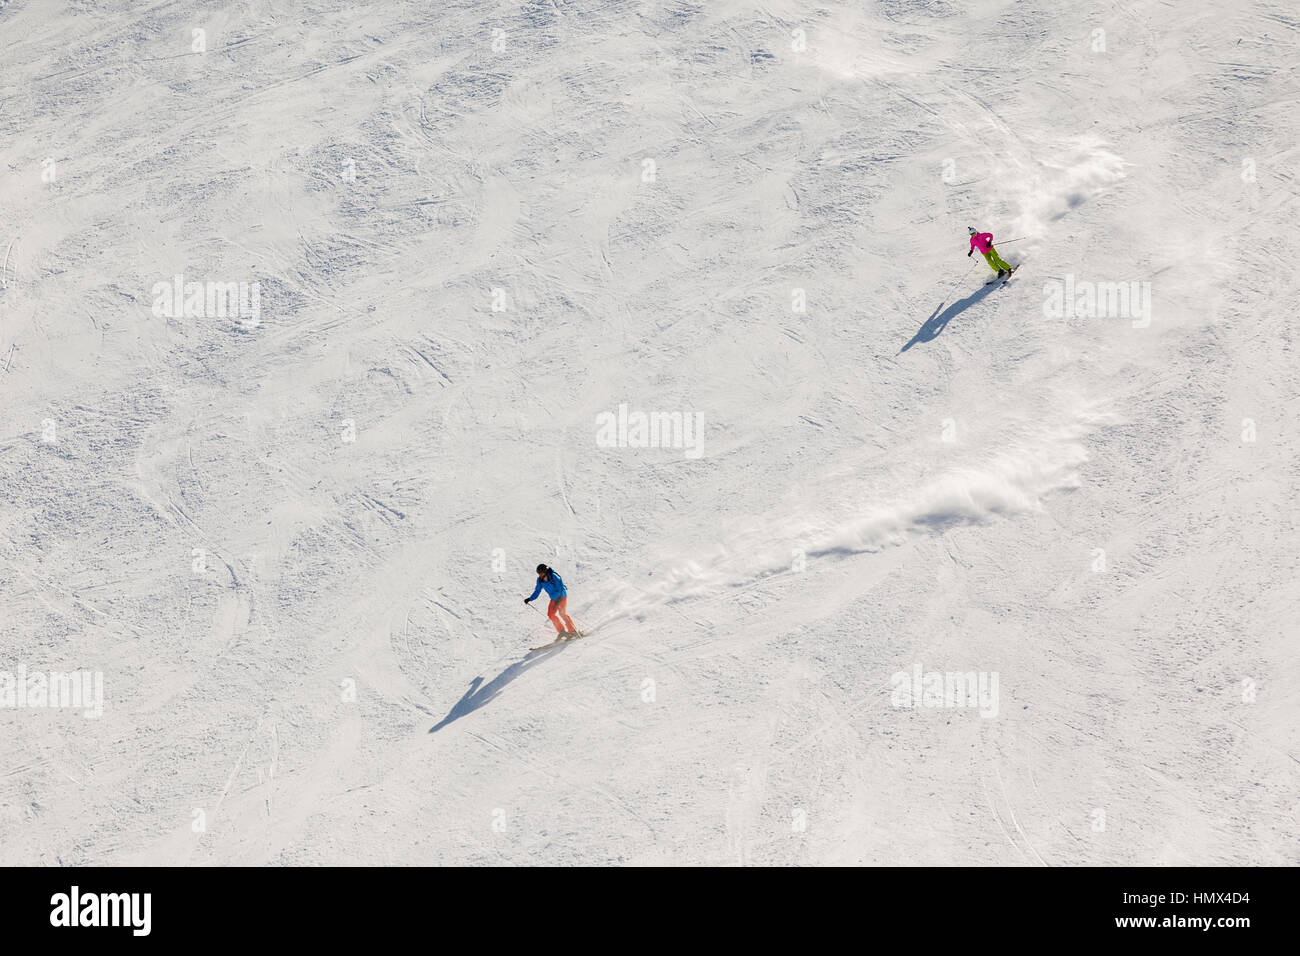 Two skiers on a steep black ski run with trails of snow dust behind them. Stock Photo